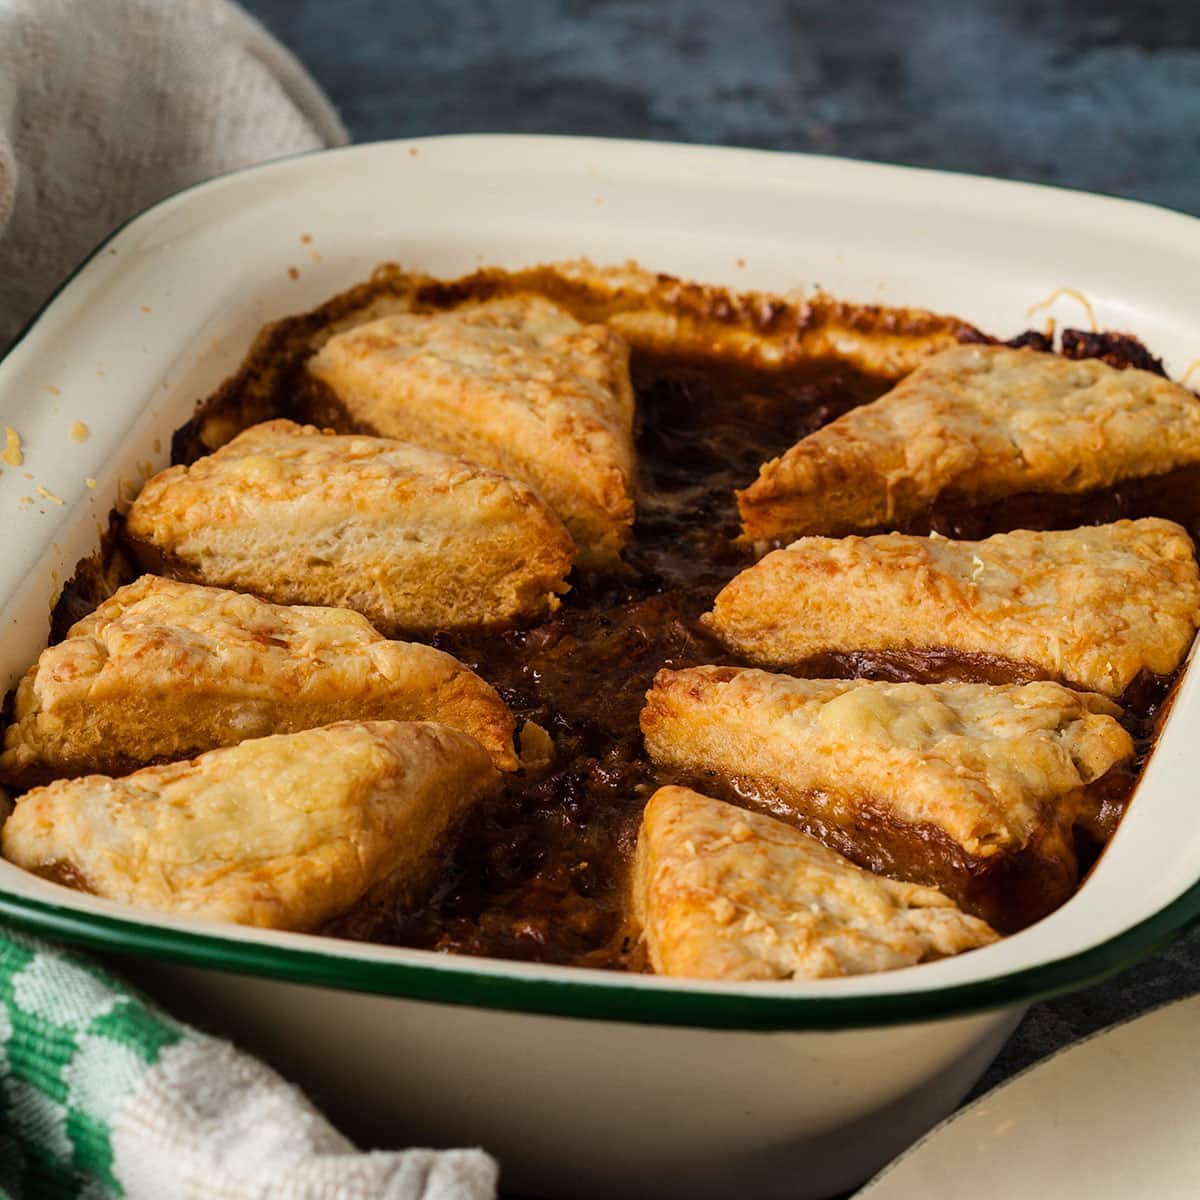 savoury mince cobbler in a baking dish.